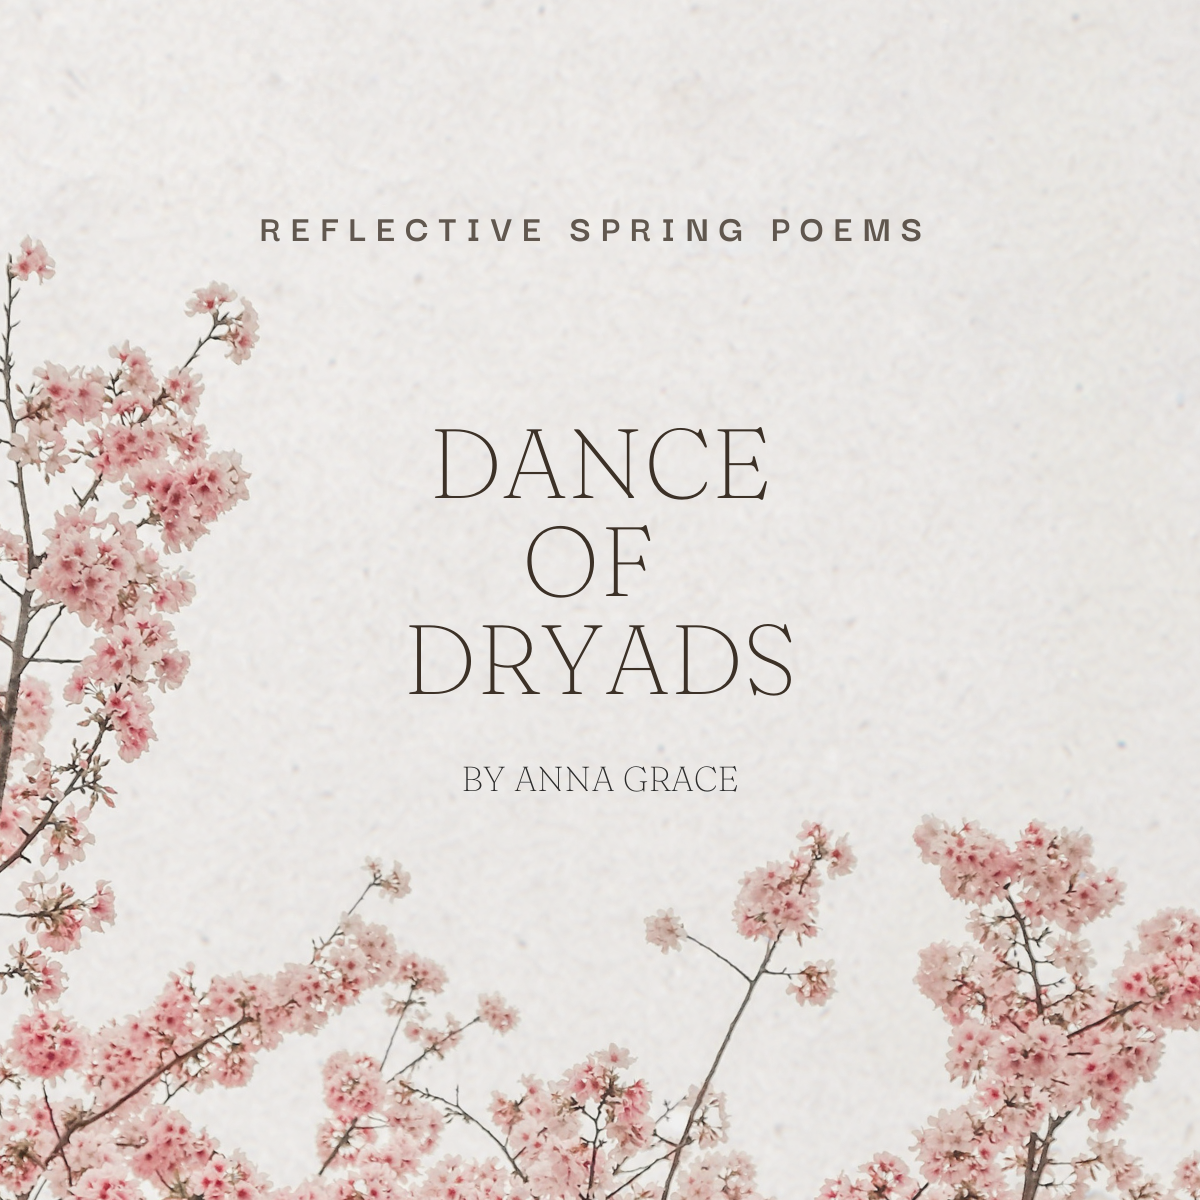 “Dance of Dryads” Poetry Ebook by Anna Grace